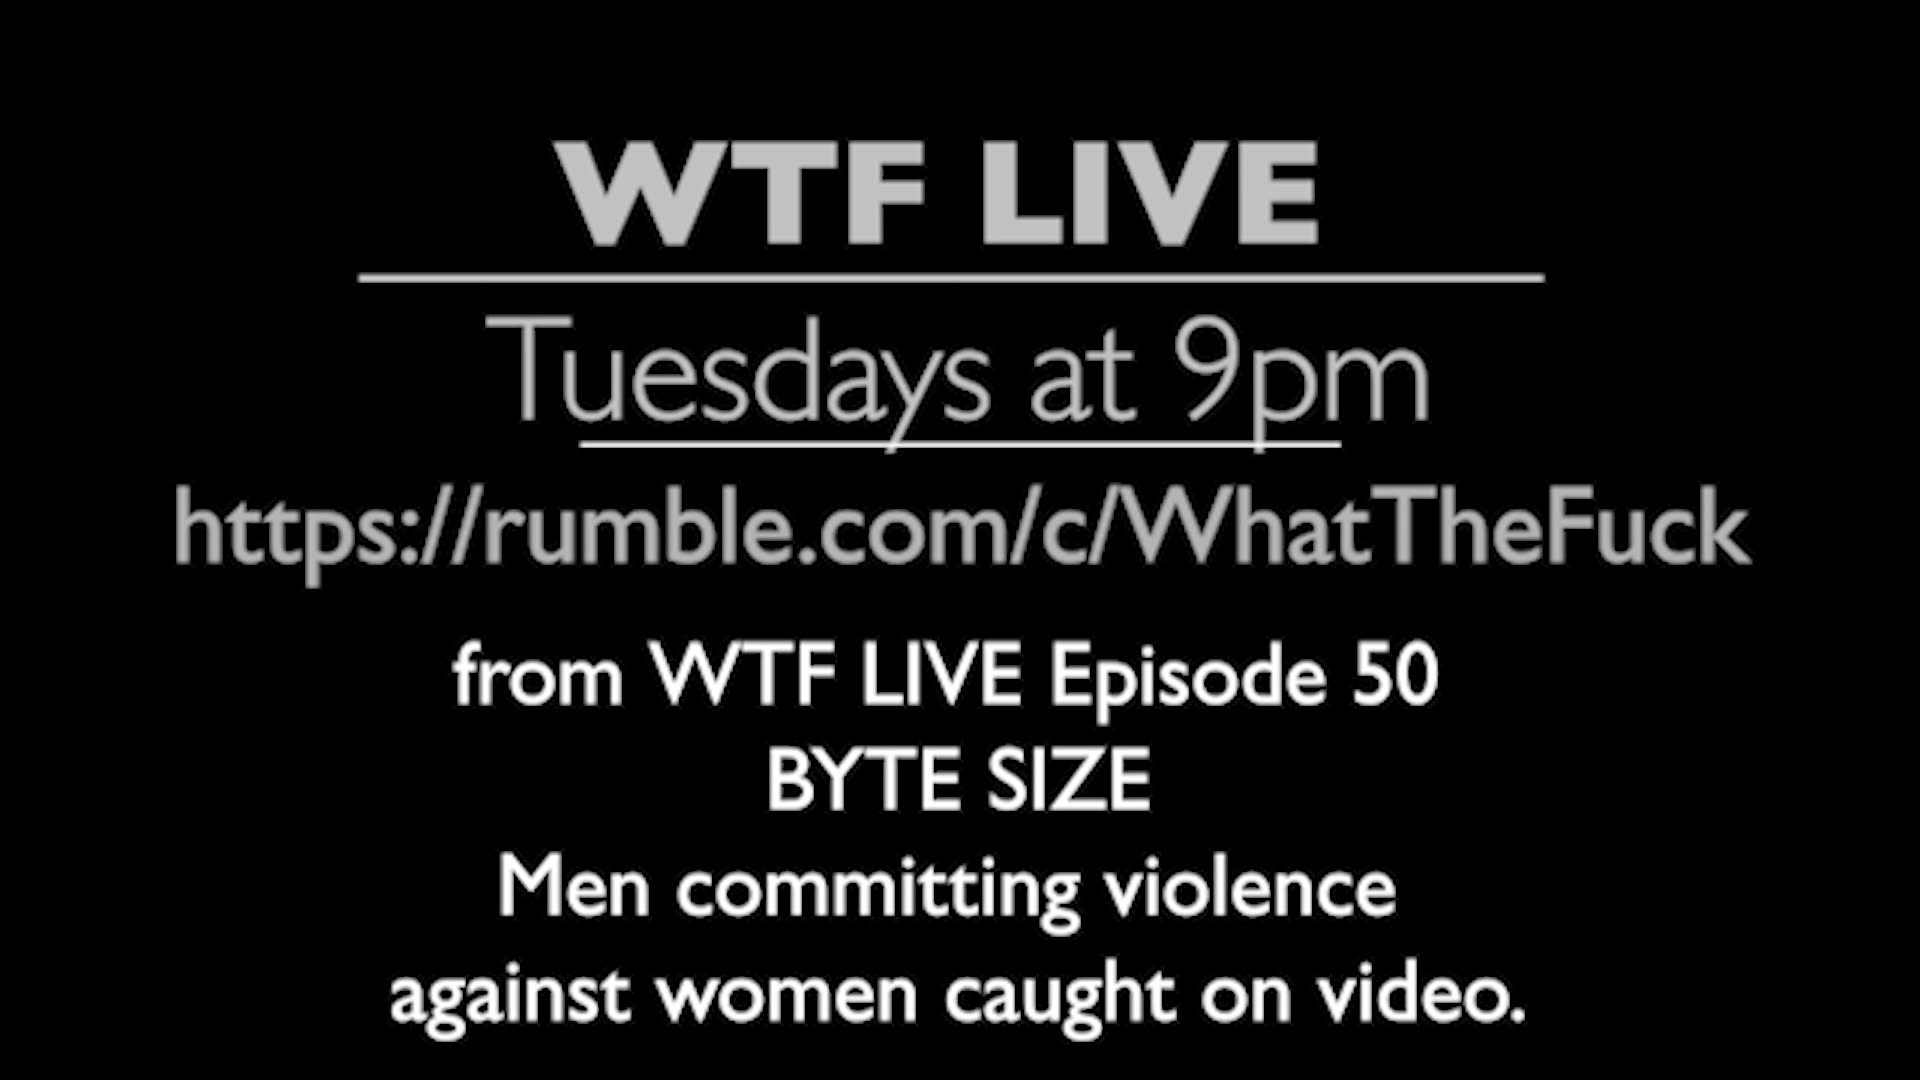 Men committing violence against women caught on video - WTF LIVE BYTE SIZE